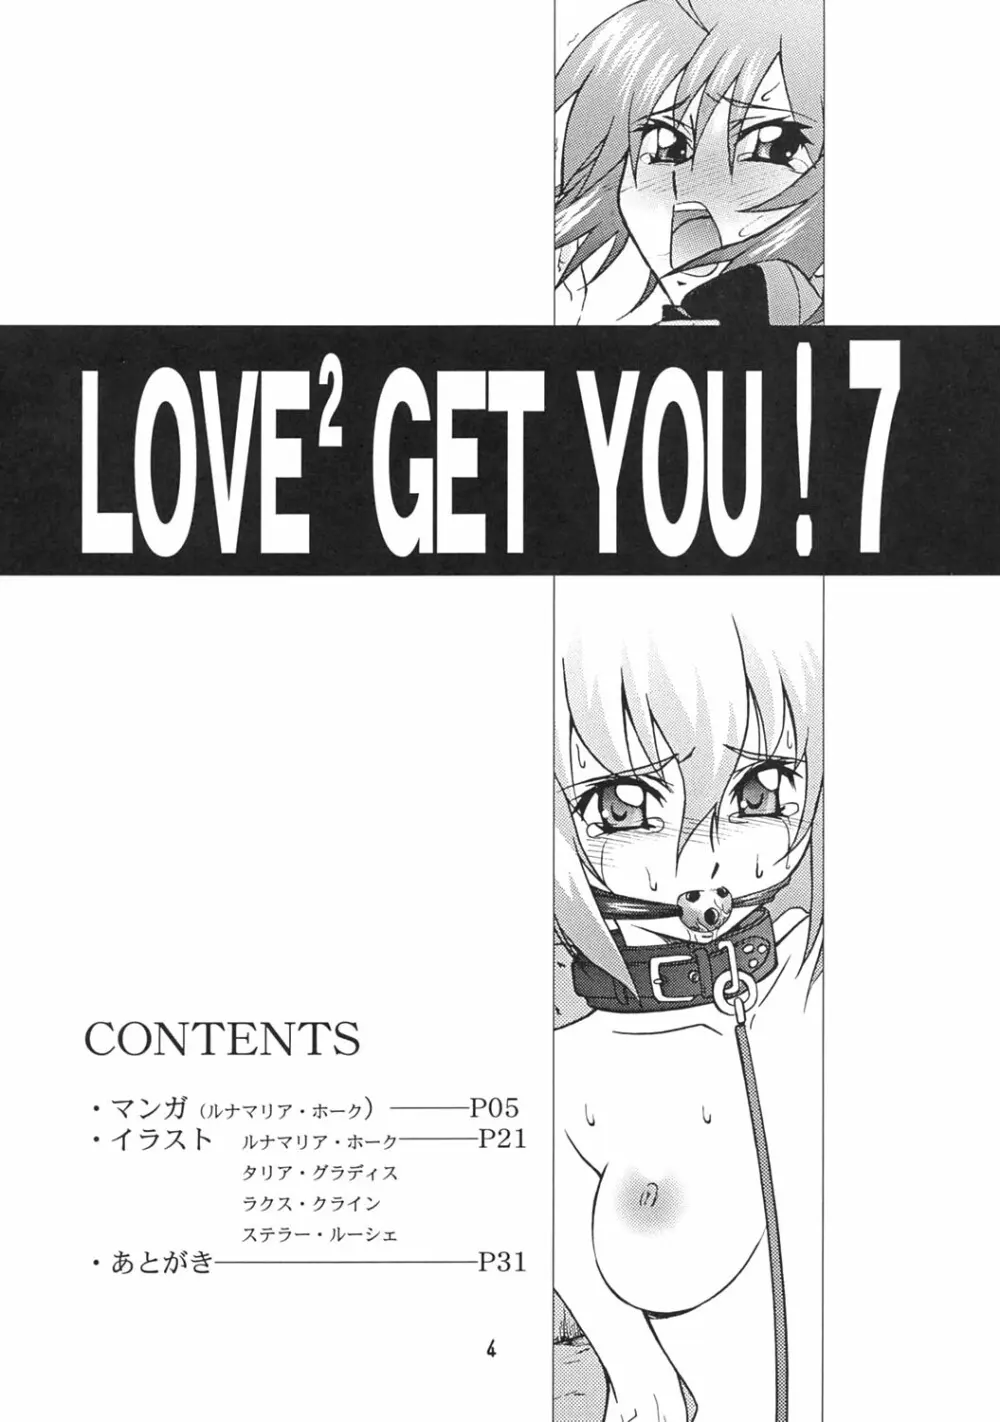 LOVE LOVE GET YOU! 7 Page.3